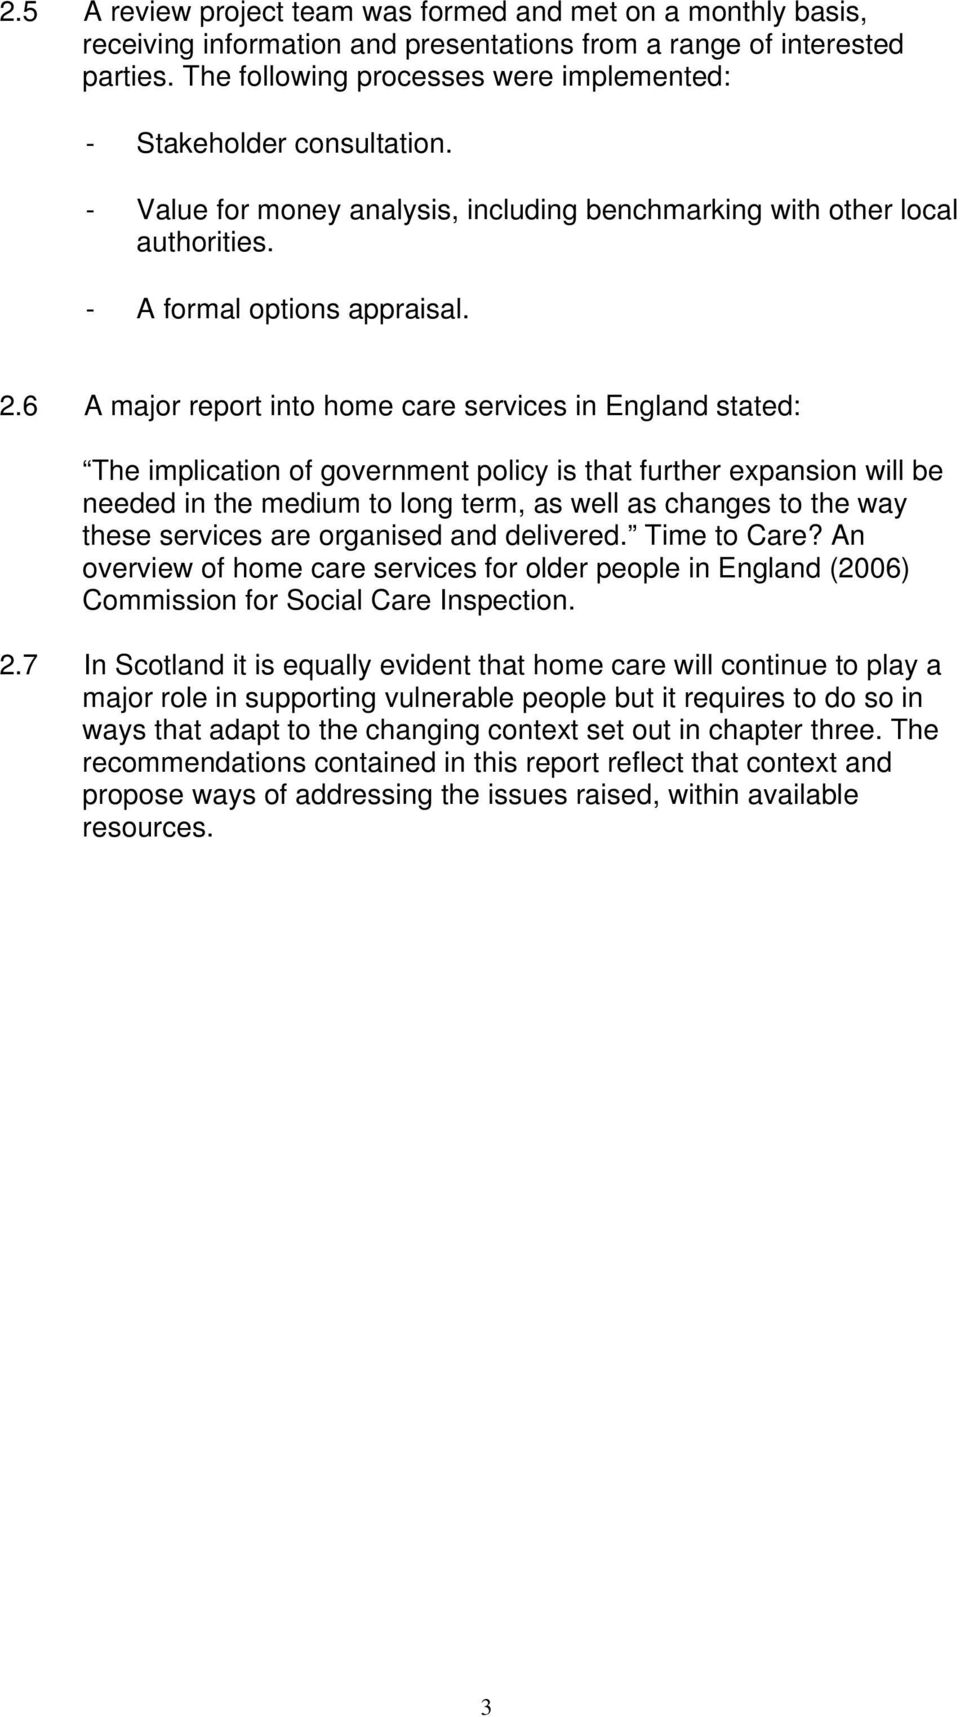 6 A major report into home care services in England stated: The implication of government policy is that further expansion will be needed in the medium to long term, as well as changes to the way